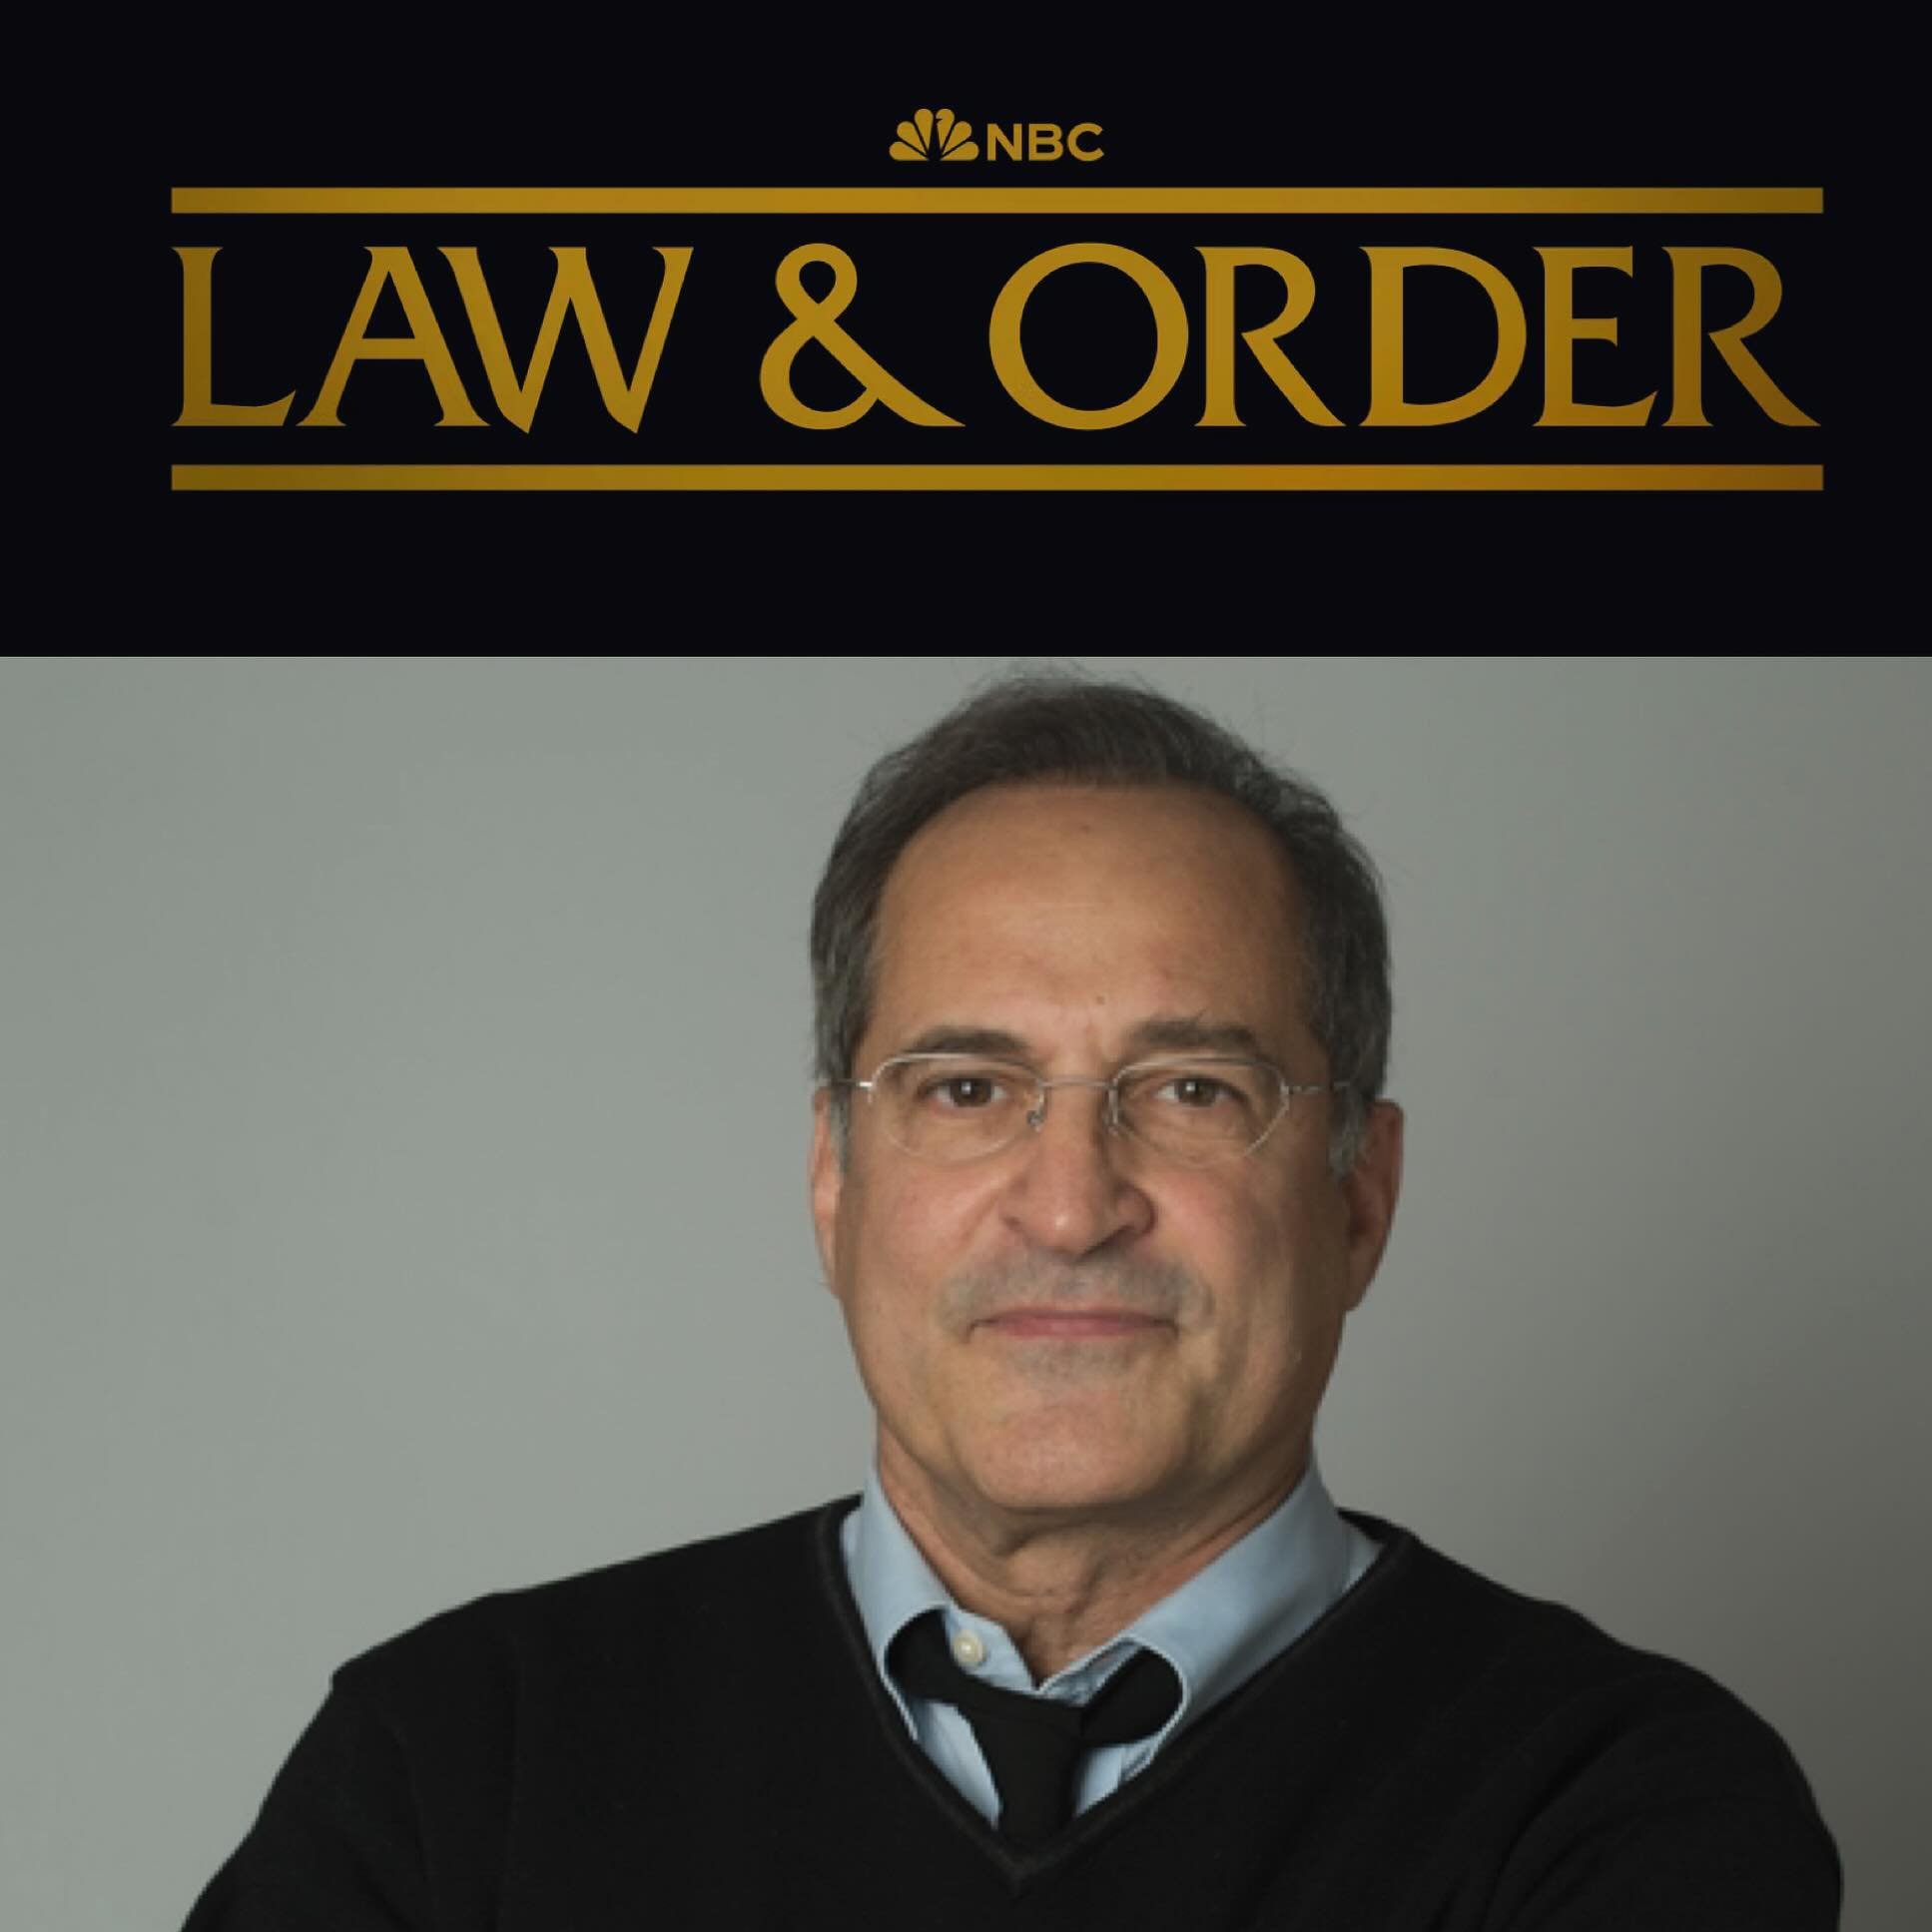 Neal Benari is back in his recurring role on tonight&rsquo;s episode of @nbclawandorder - don&rsquo;t miss him! ⭐️